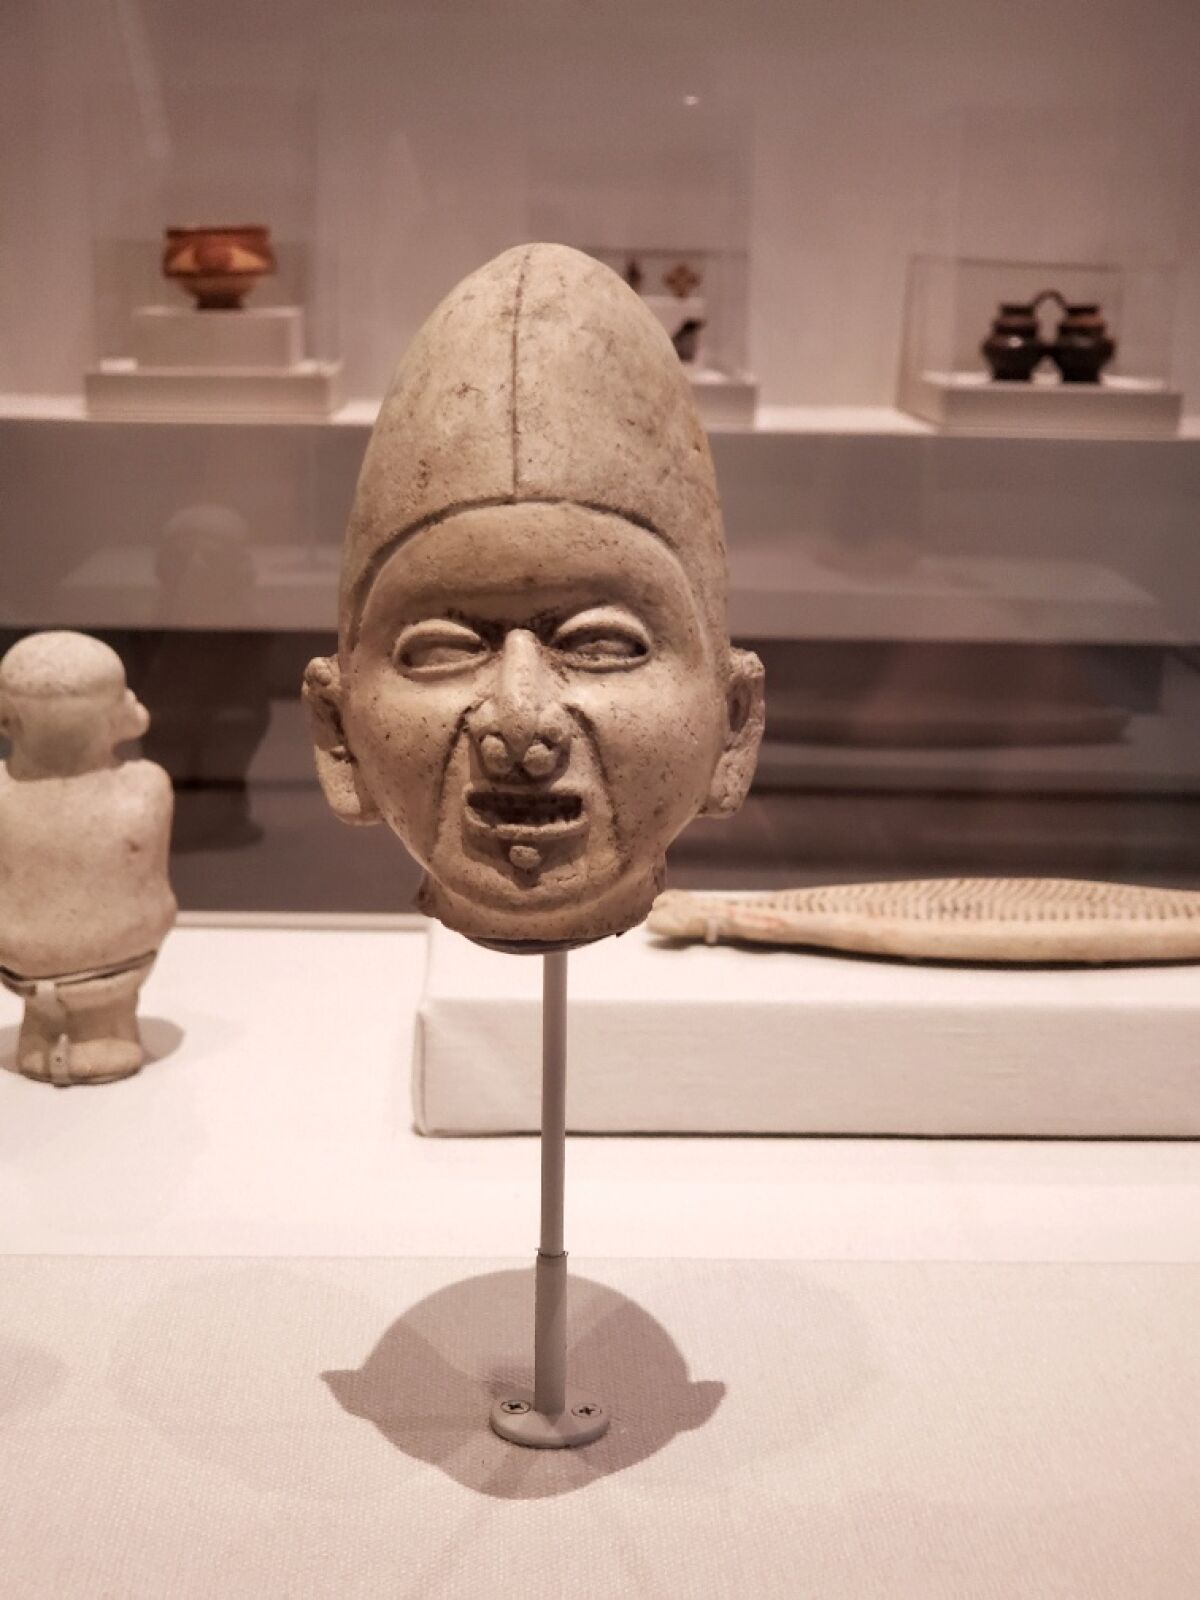 A clay figure of a face.